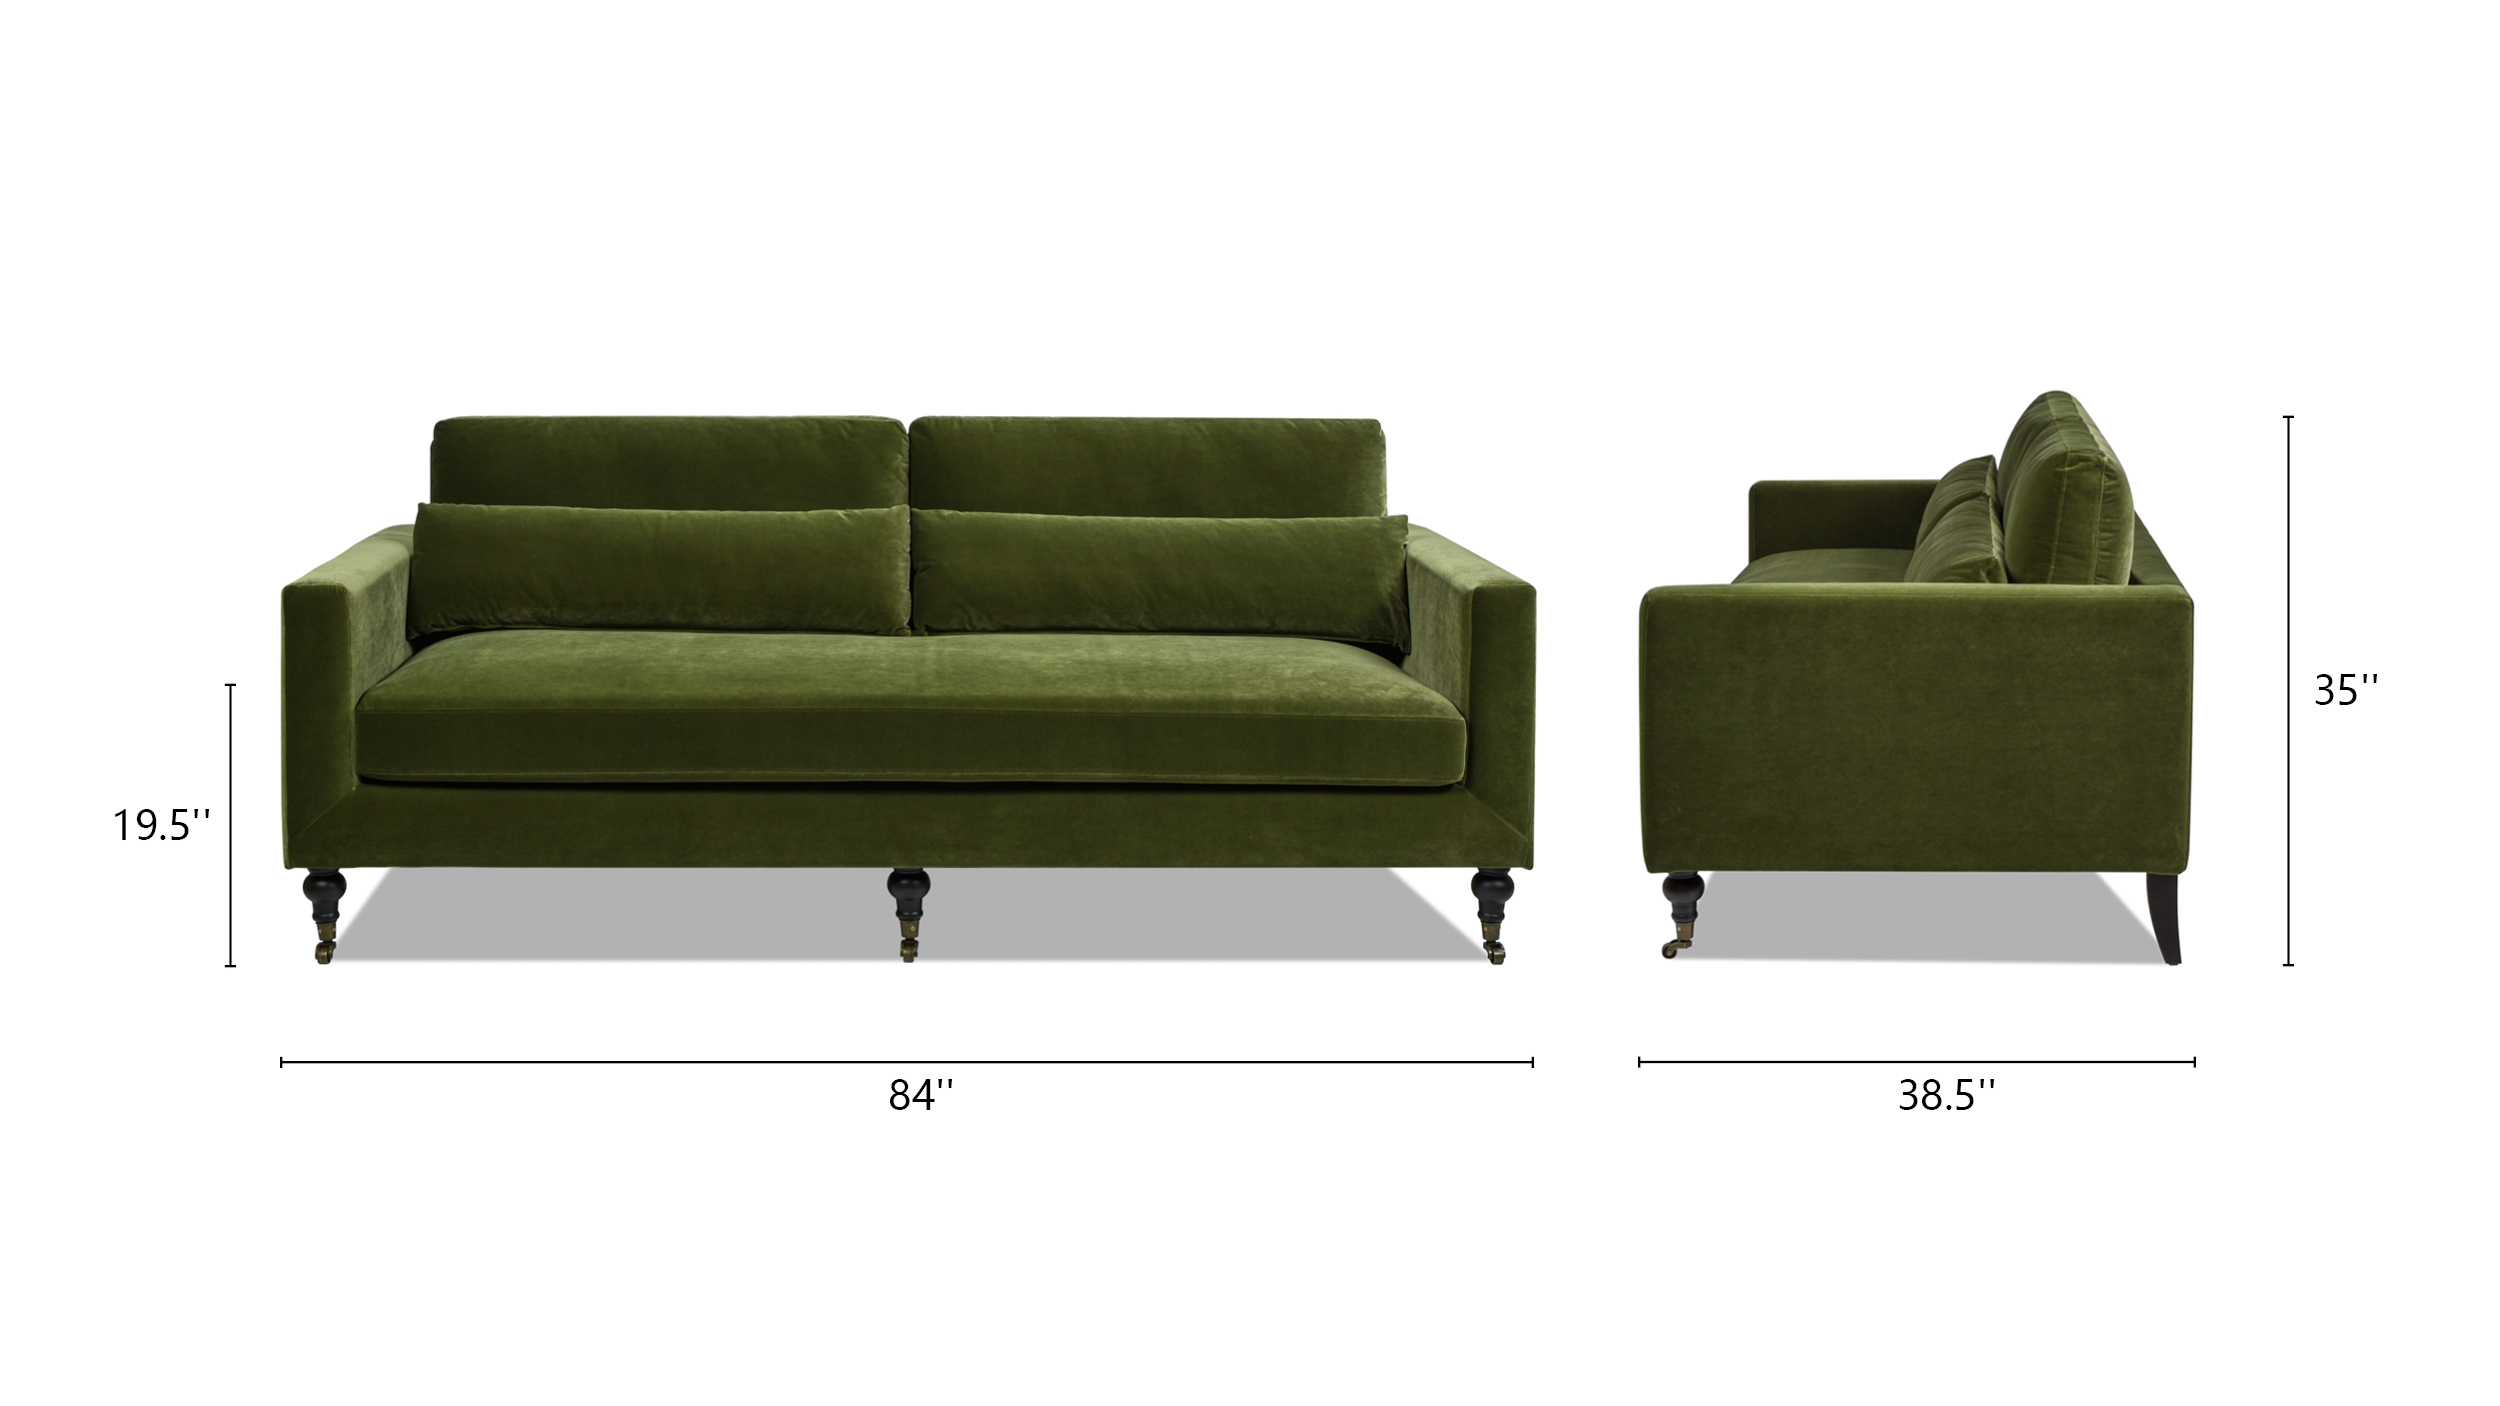 Elliot Track Arm Sofa with Caster Turn Legs, Olive Green